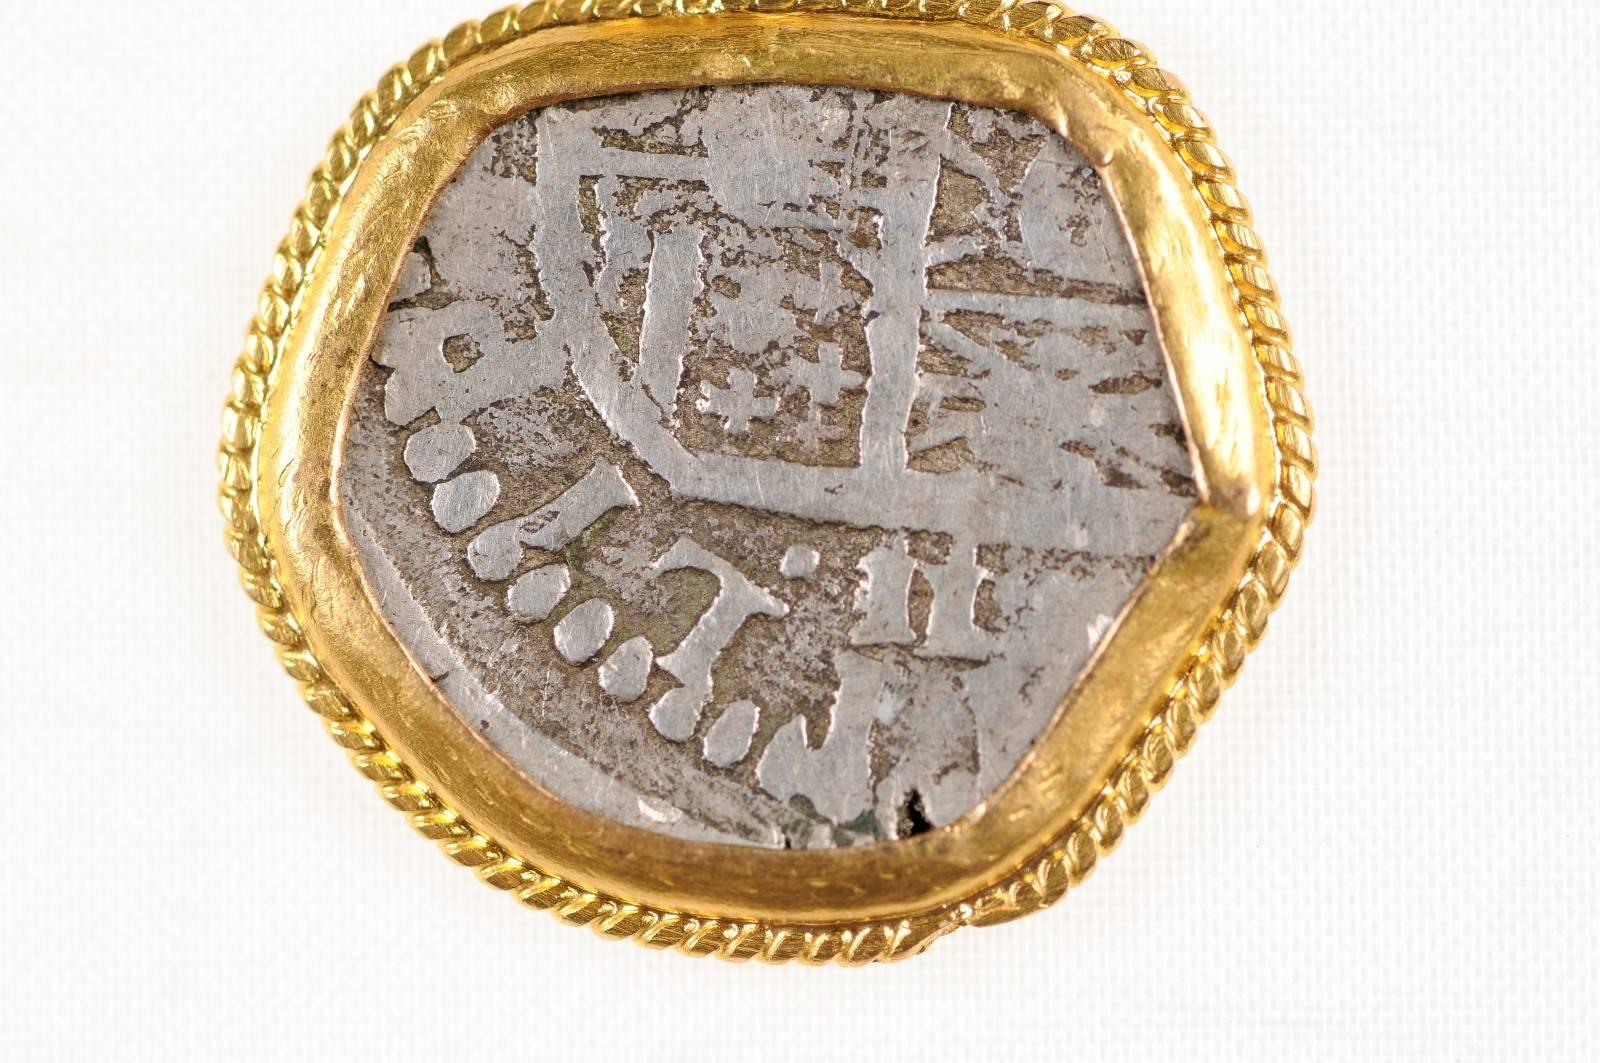 Spanish Silver Cob Coin circa 1500s Set in Rope Accented 22 Karat Gold Bezel For Sale 4